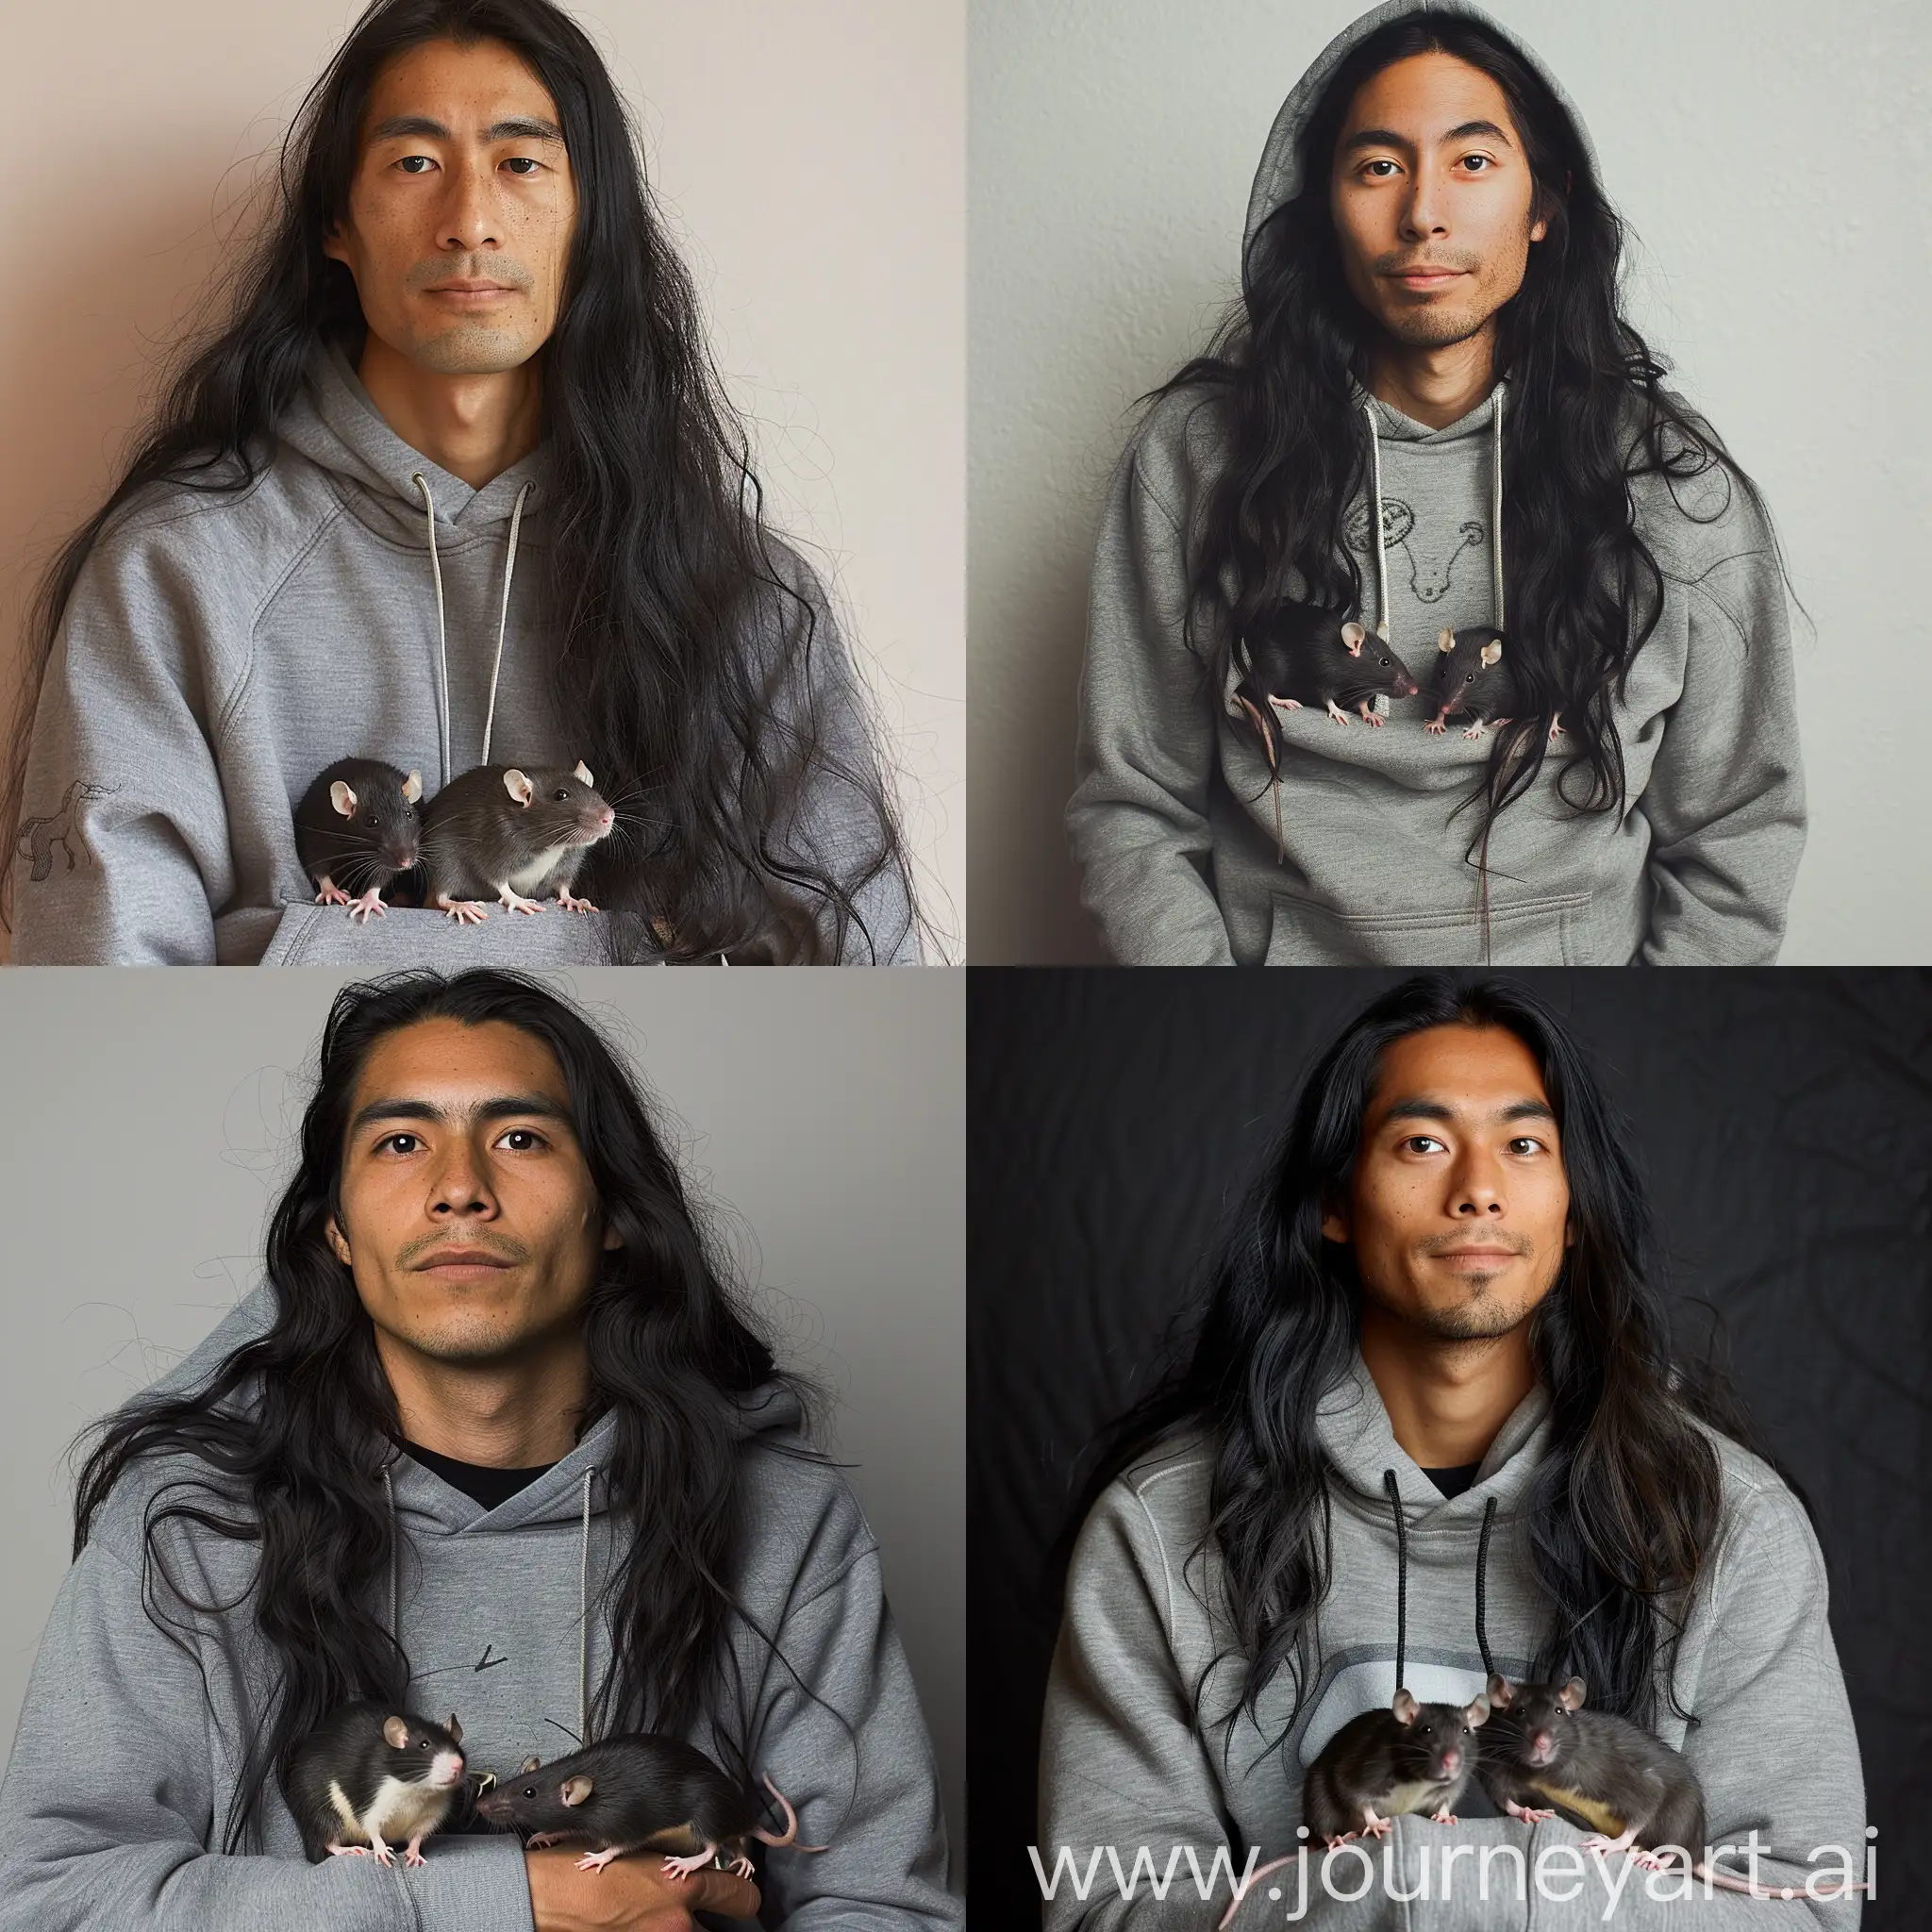 A man with long black hair, wearing a gray hoodie, with 2 rats sitting on it